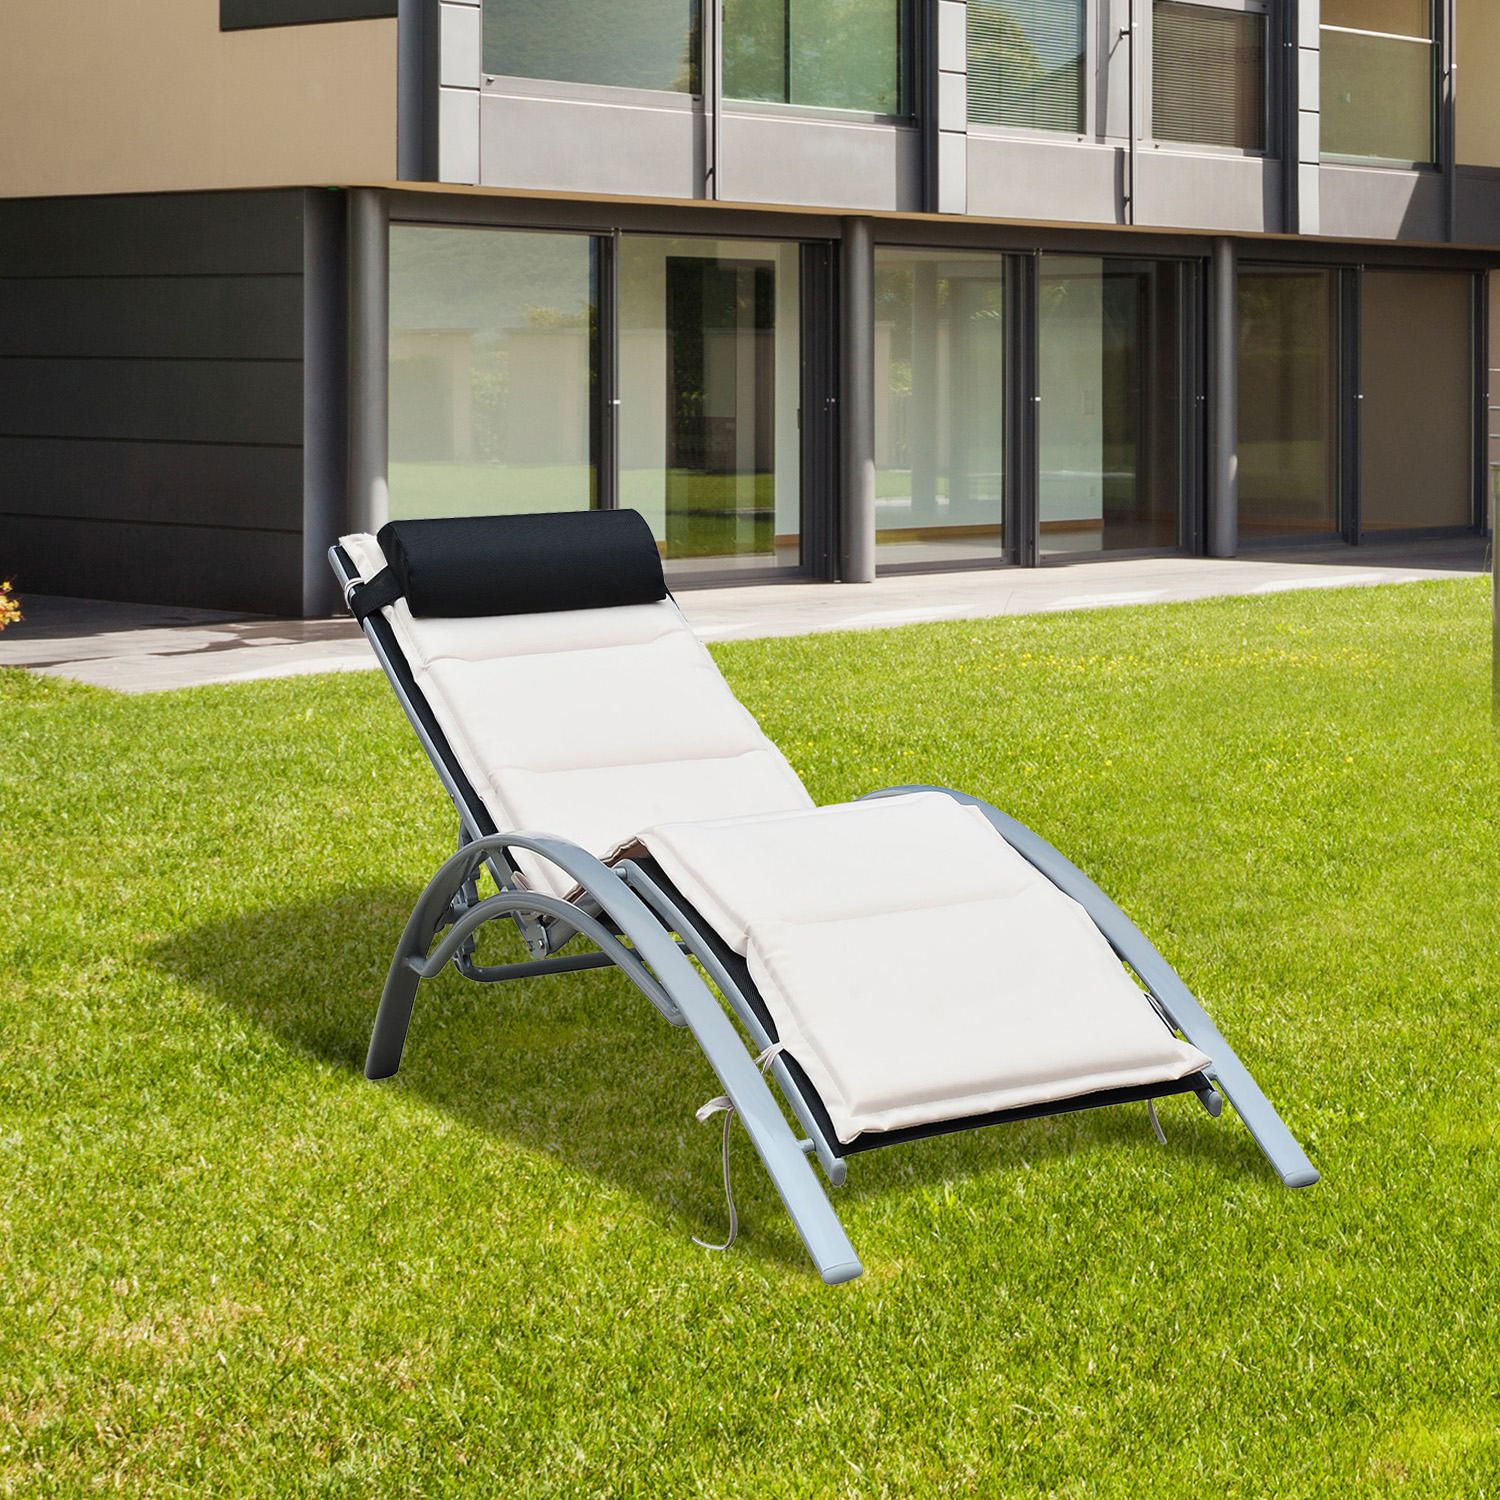 Outsunny Adjustable Reclining Outdoor Chaise Lounge Chair | Walmart Canada